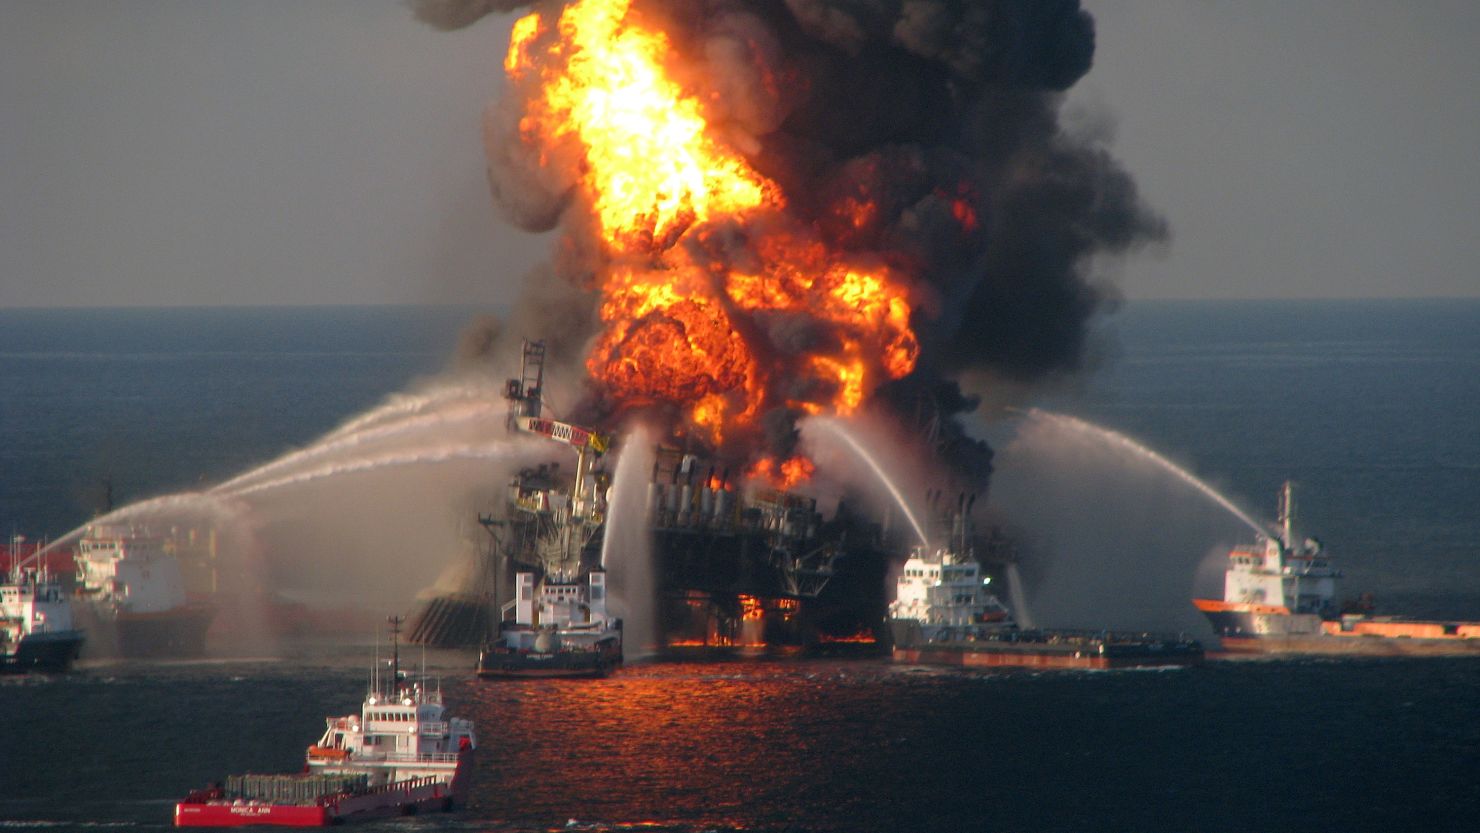 Fire boat response crews battle the blazing remnants of the off shore oil rig Deepwater Horizon on April 21, 2010.